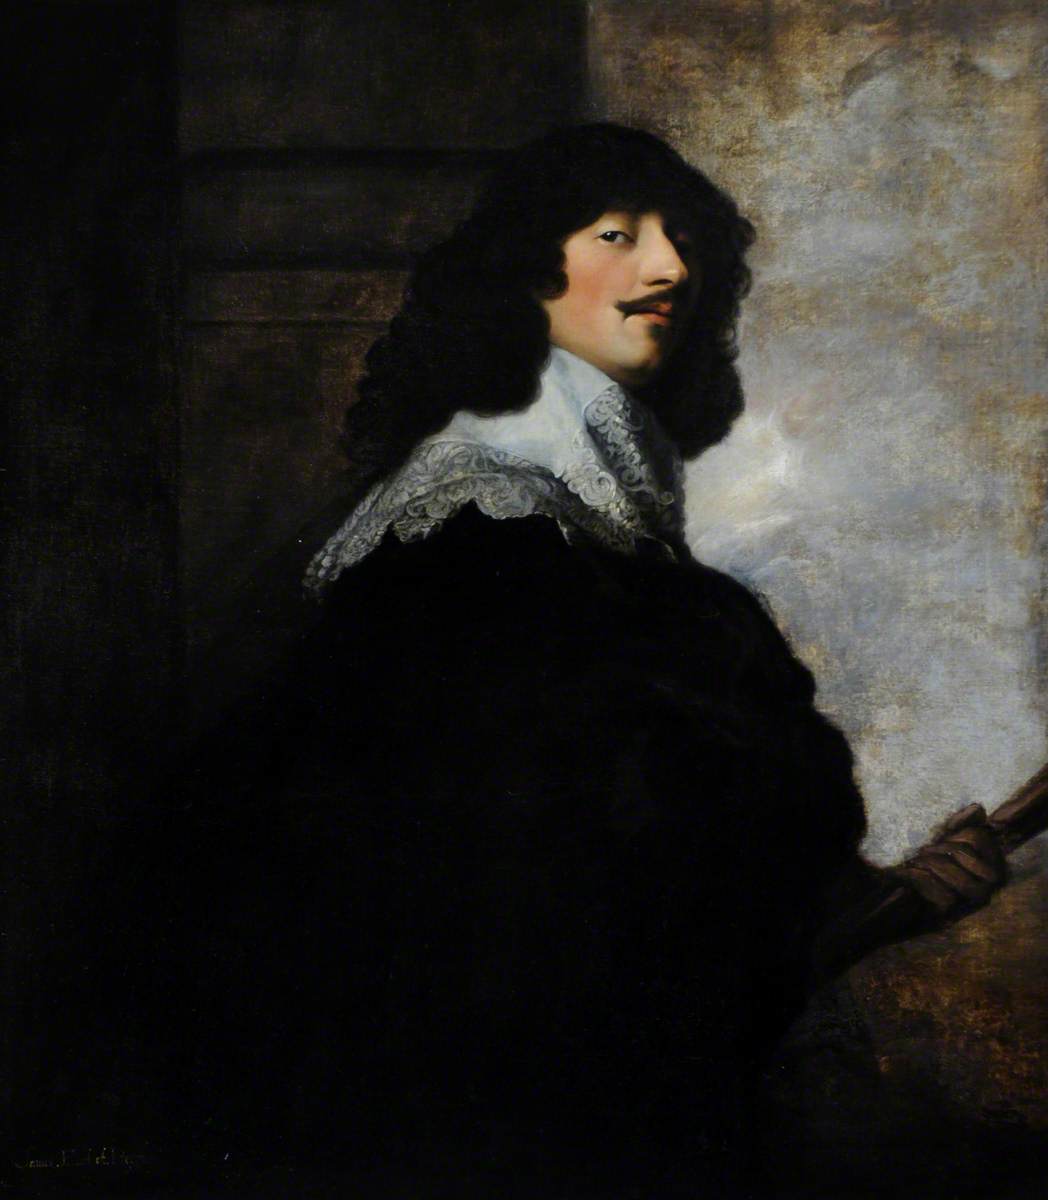 Supposedly James Stanley (1607–1651), Lord Strange, 7th Earl of Derby